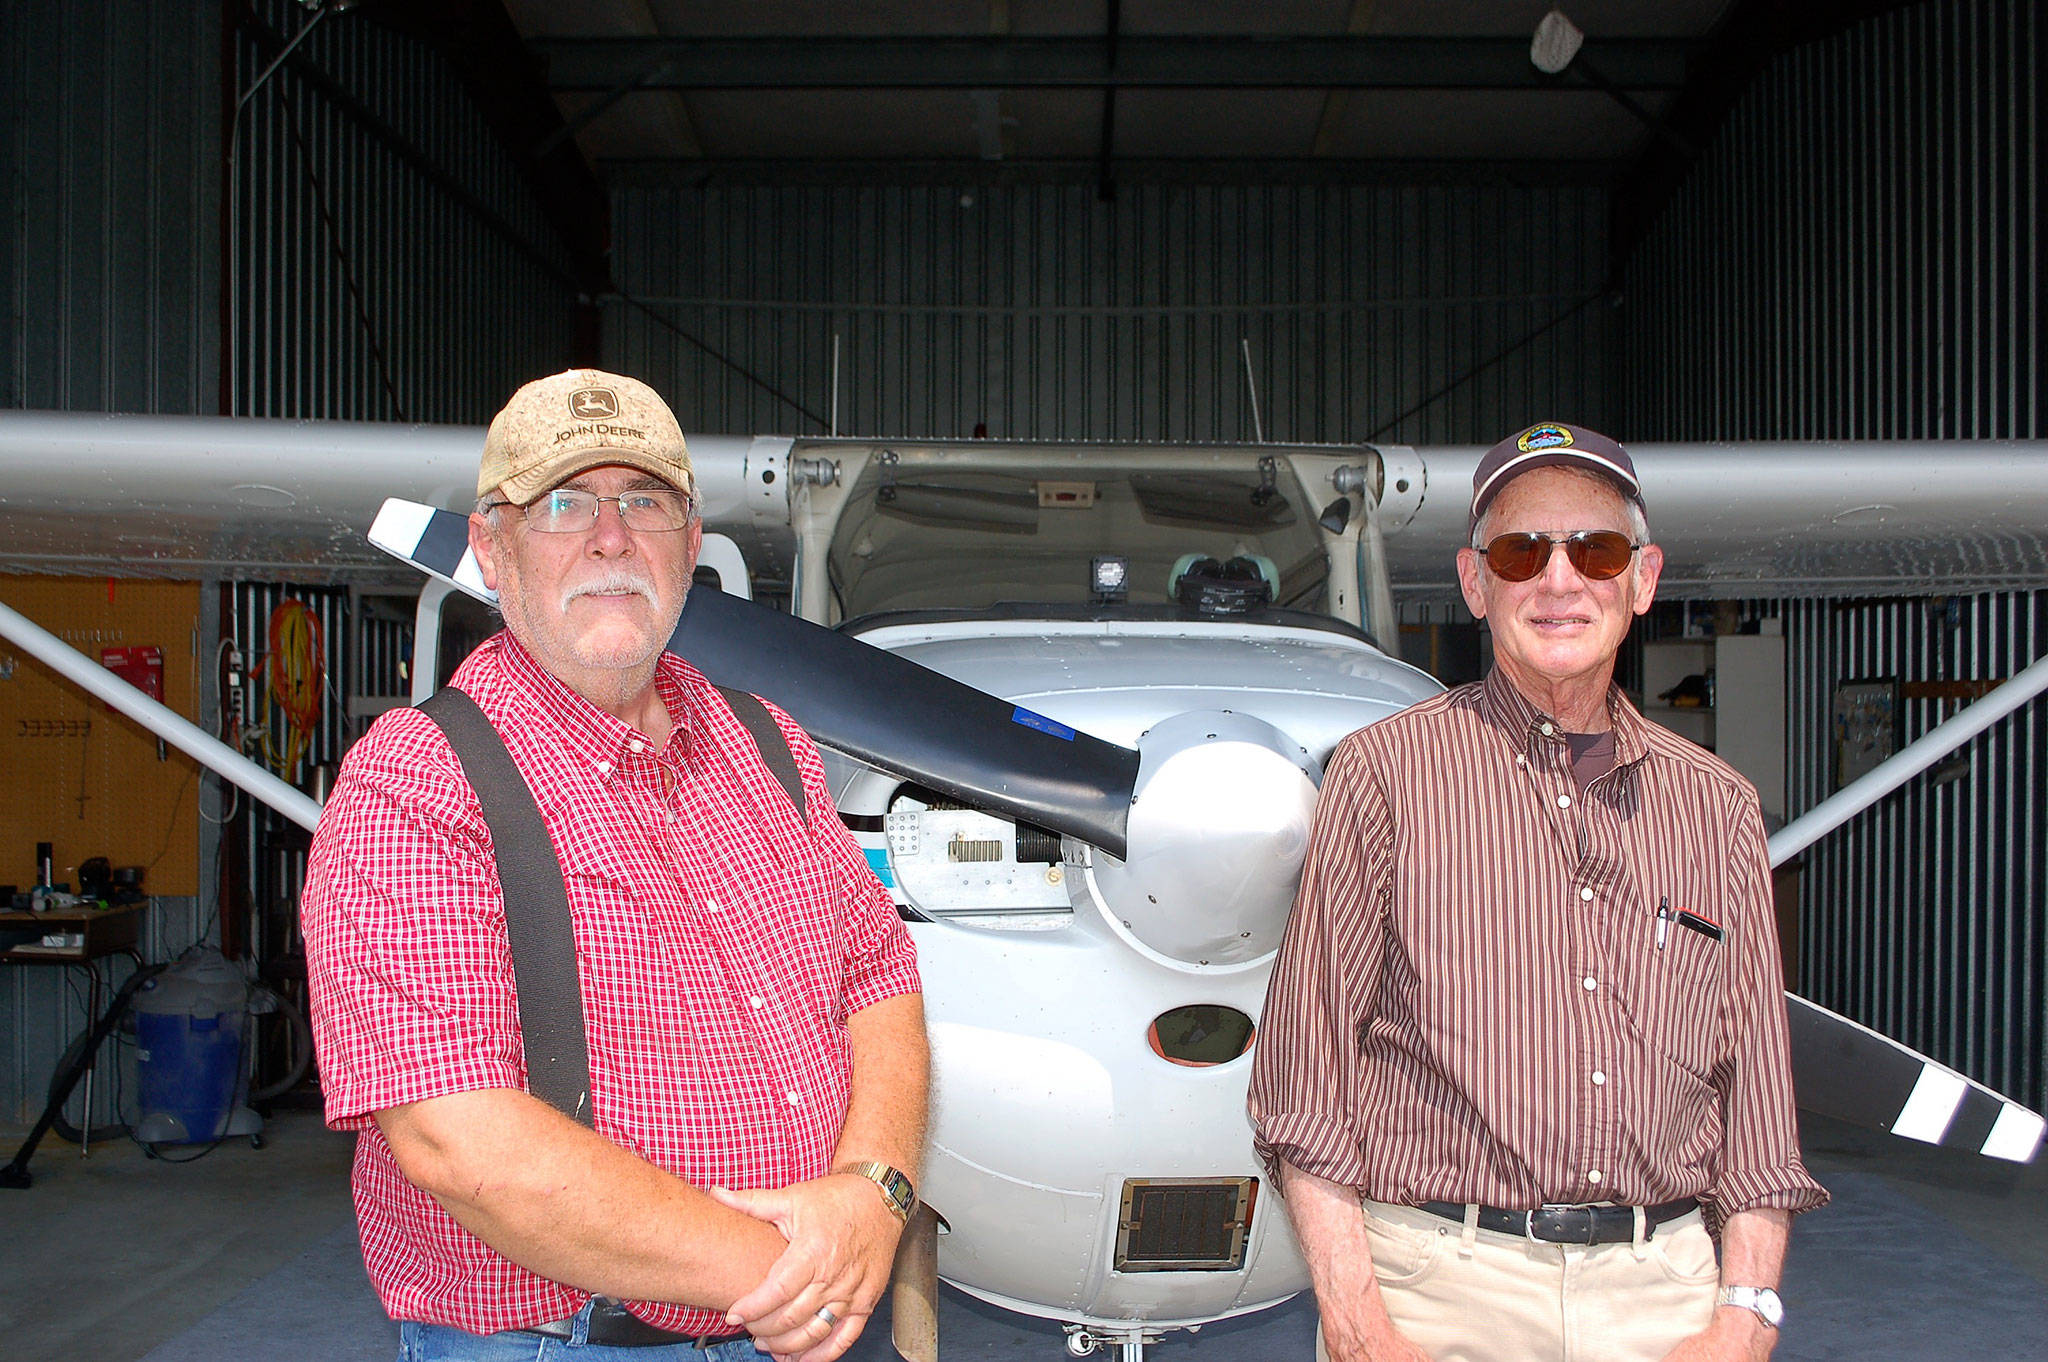 Sequim residents and airplane owners Dan Ramberg, left, and John Meyers stand in Ramberg’s airplane hangar at the Sequim Valley Airport. Ramberg and Meyers are both participating pilots for the Young Eagles Rally on Saturday, Aug. 12, giving free airplane rides to youth ages 8-17. Sequim Gazette photo by Erin Hawkins